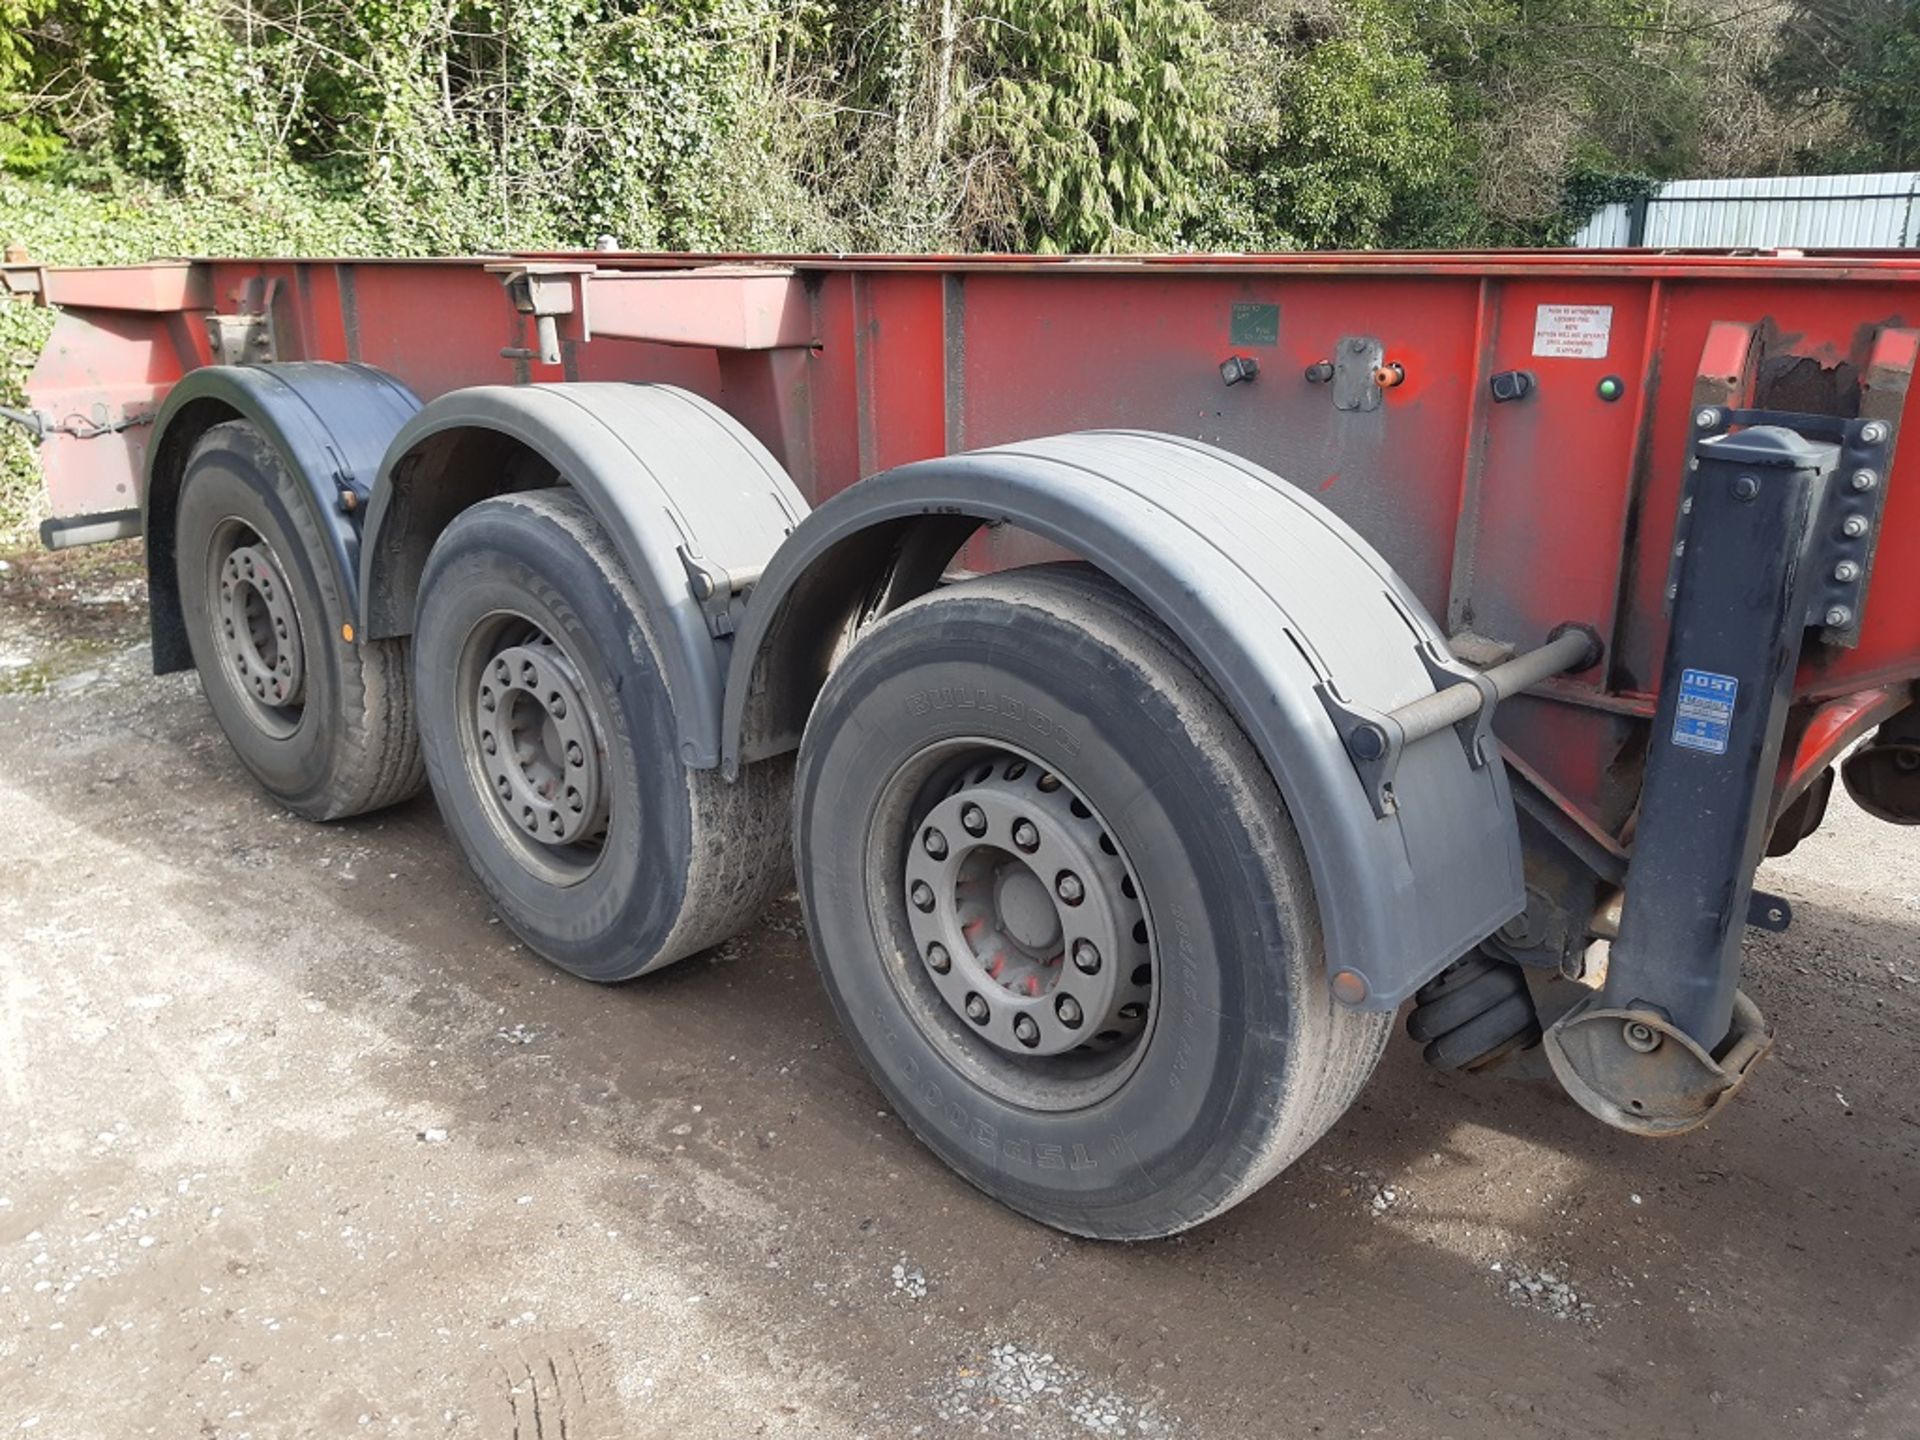 Red Dennison Four Axle (one drop axle) Multifunction Skeletal Trailer (2006) - Image 2 of 23